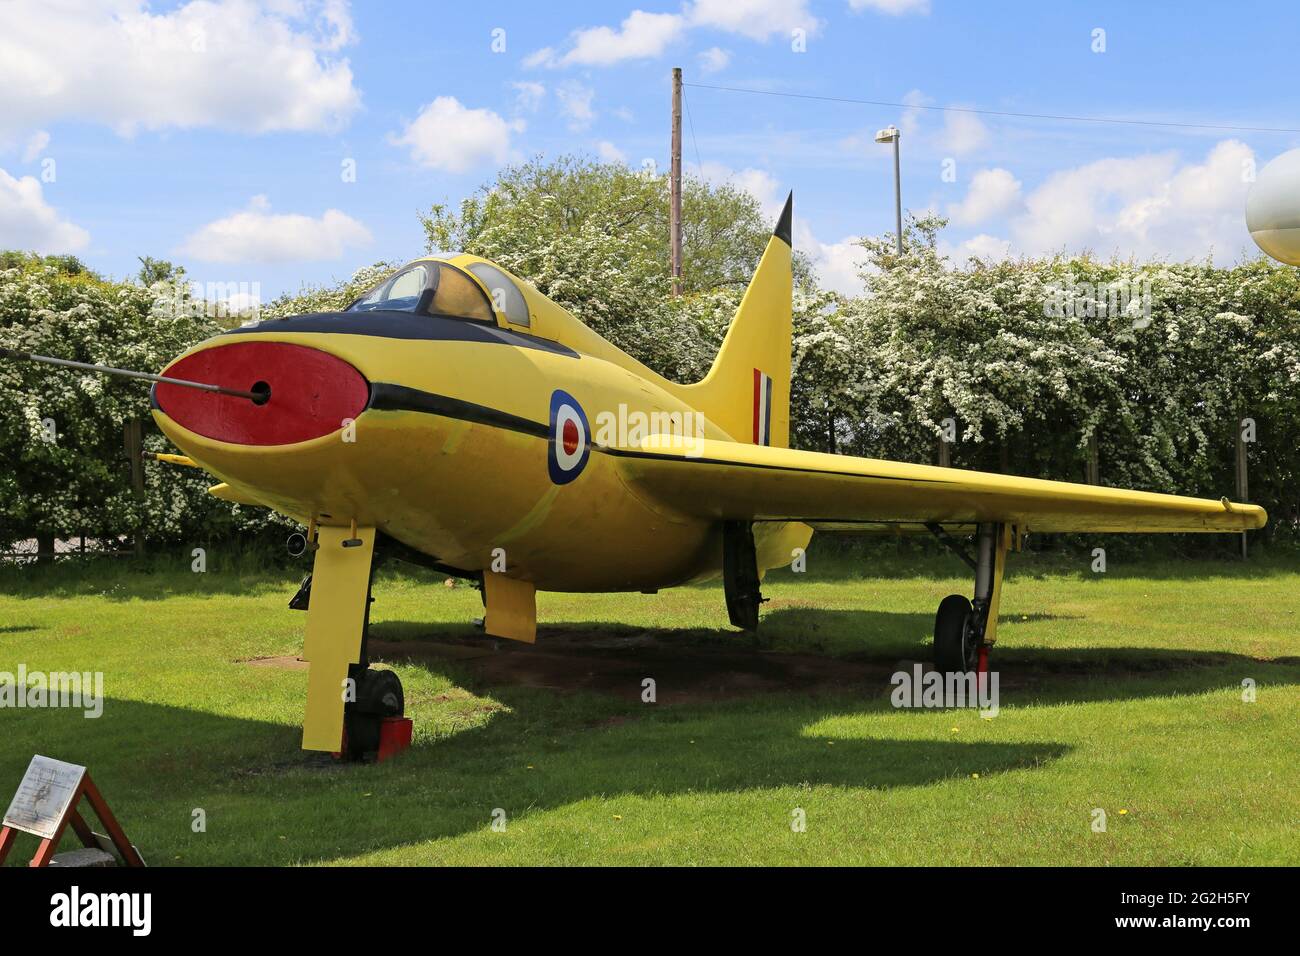 Boulton Paul P.111A (1951), Midland Air Museum, Coventry Airport, Baginton, Warwickshire, England, Great Britain, UK, Europe Stock Photo